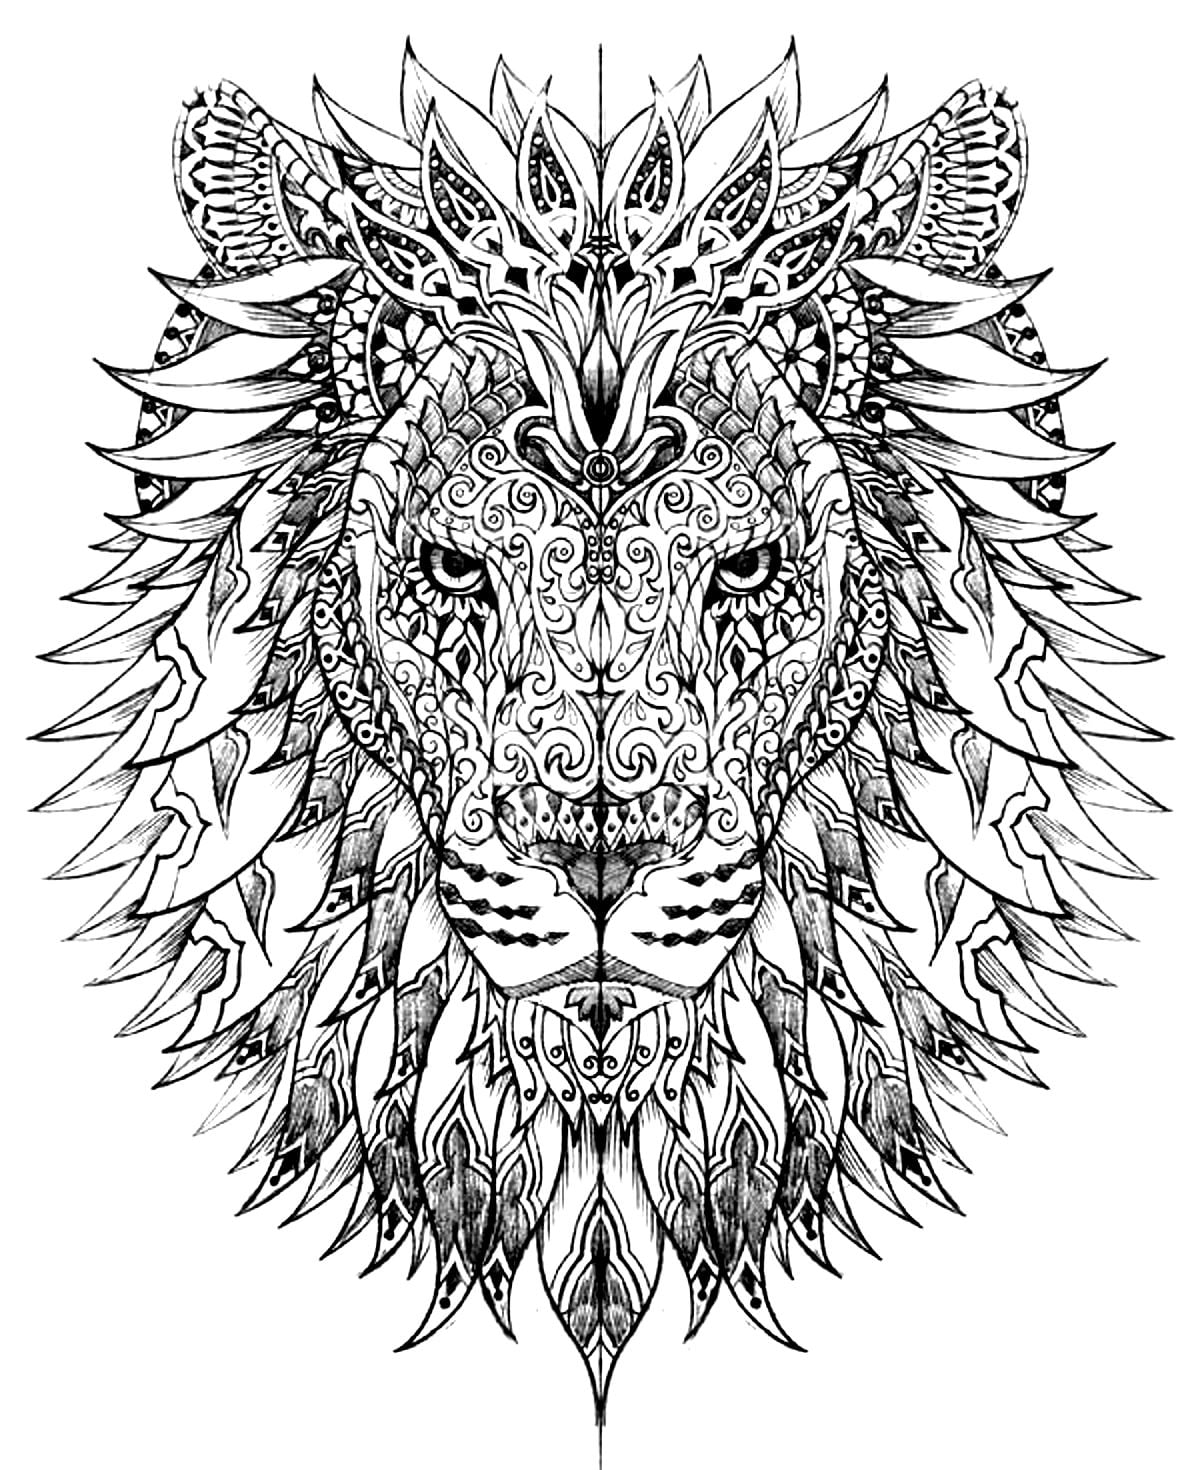 Free printable adult coloring pages smart living